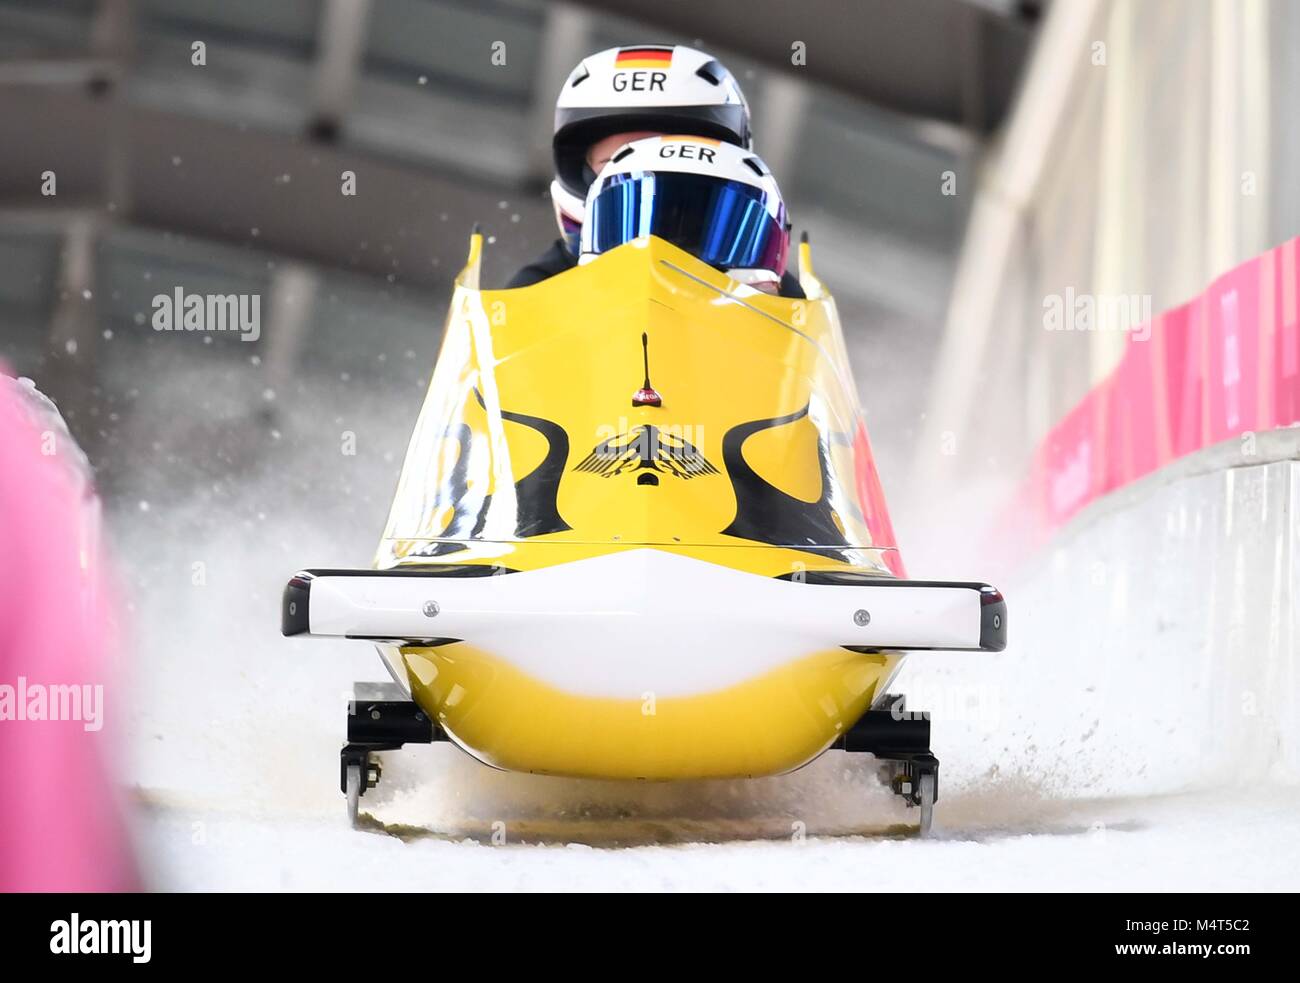 Stephanie Schneider (GER) and Annika Drazek (GER). Womens bobsleigh training. Alpensia sliding centre. Pyeongchang2018 winter Olympics. Alpensia. Republic of Korea. 17/02/2018. Credit: Sport In Pictures/Alamy Live News Stock Photo